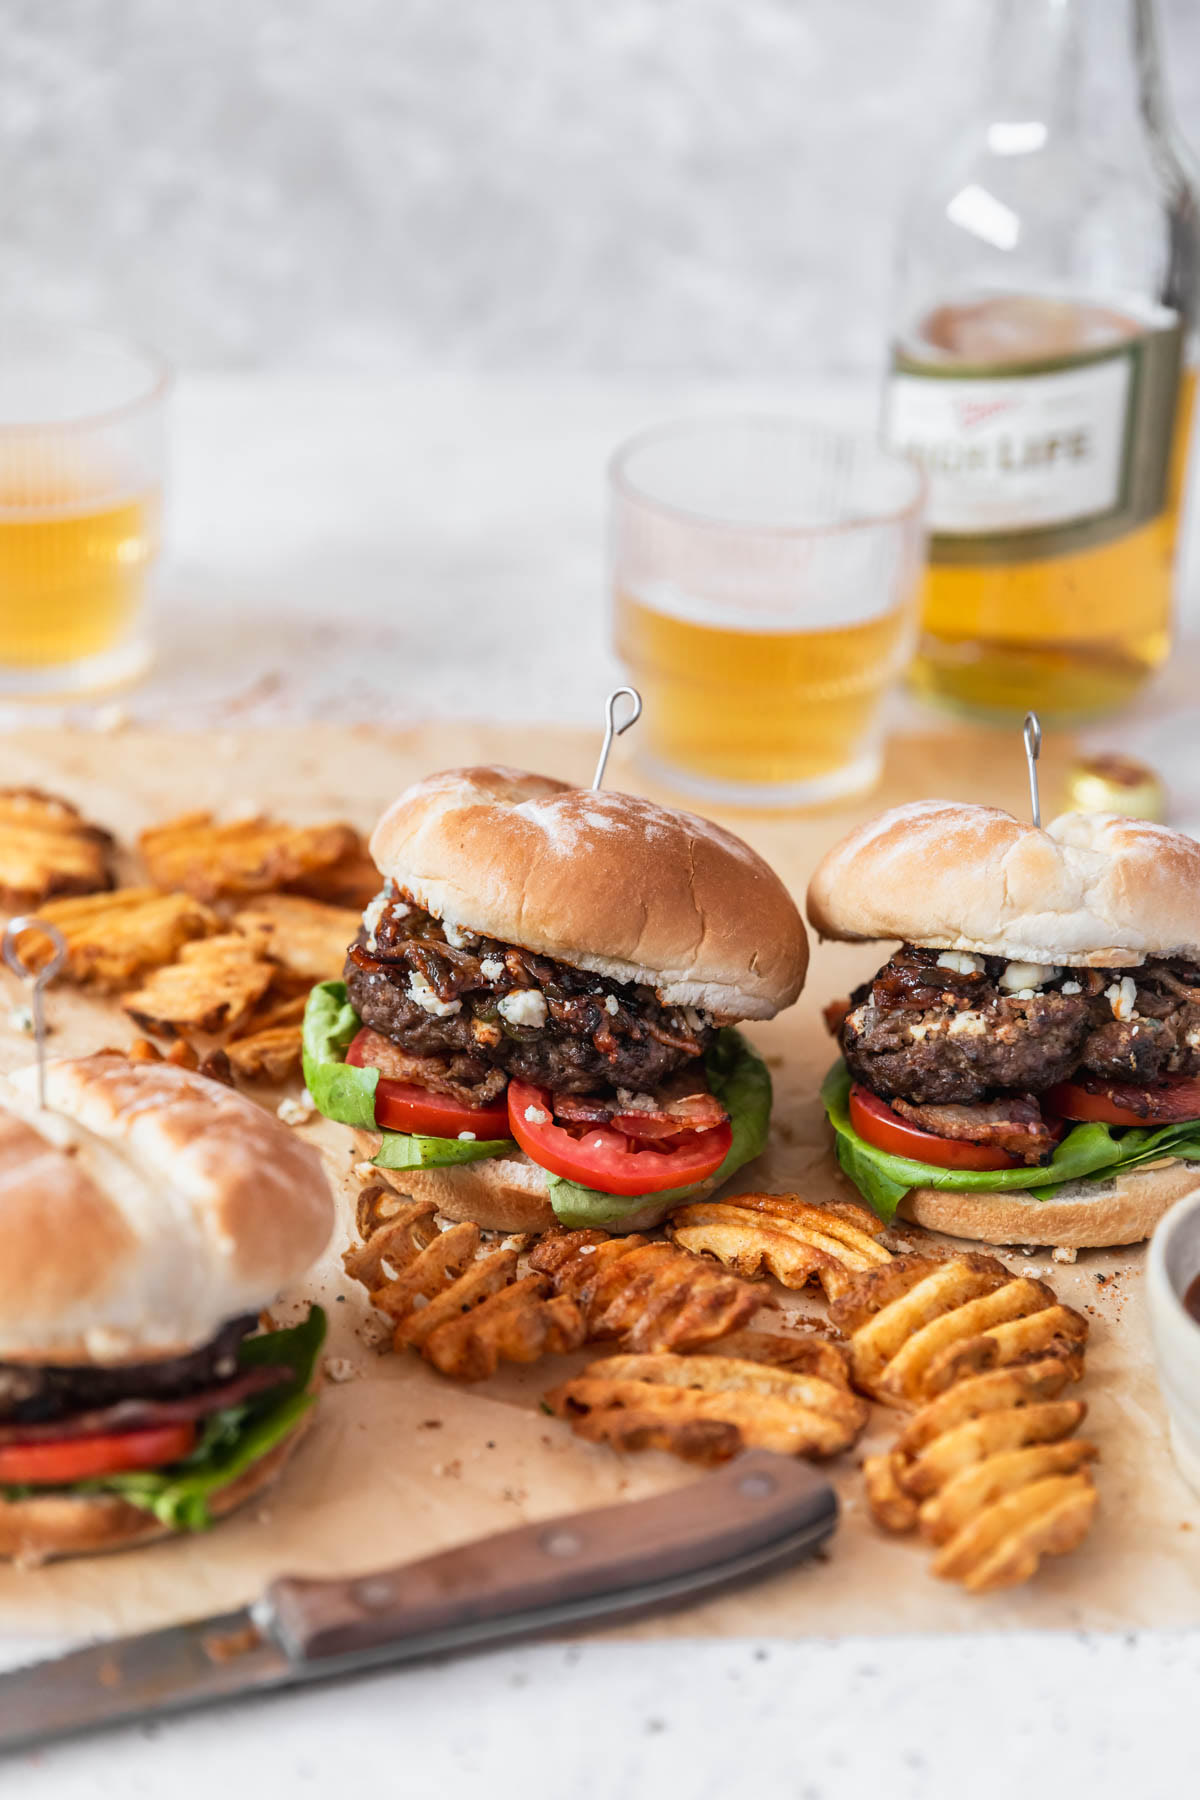 Three blue cheese burgers on brown paper next to a wood knife, waffle fries, glasses of beer, and a bottle of beer with a light grey background.